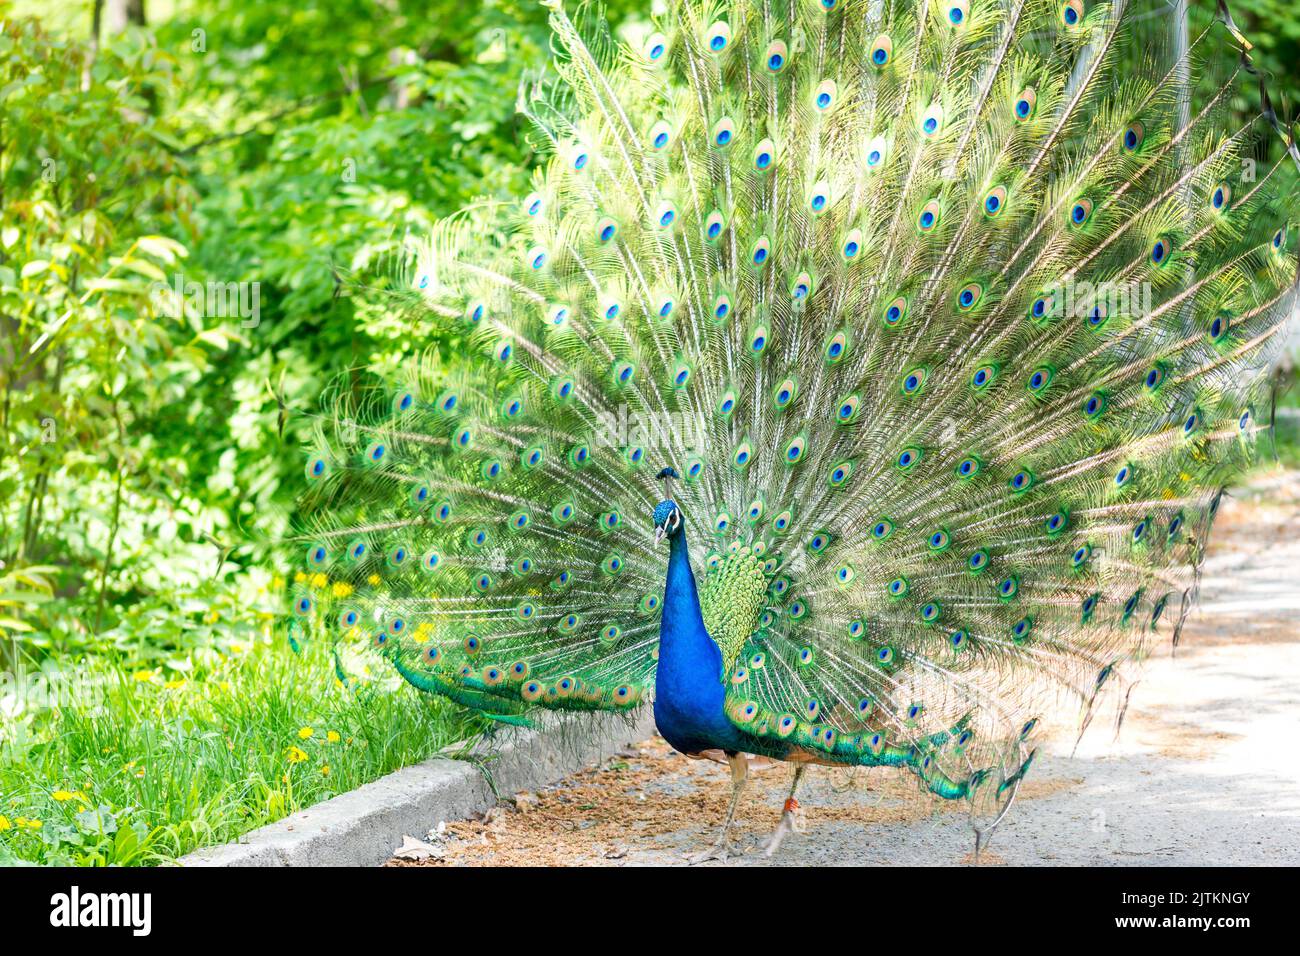 The peacock (latin name Pavo cristatus) bird on the park street. Colorful bird with beautiful feathers is walking on grass. Portrait of peacock bird. Stock Photo